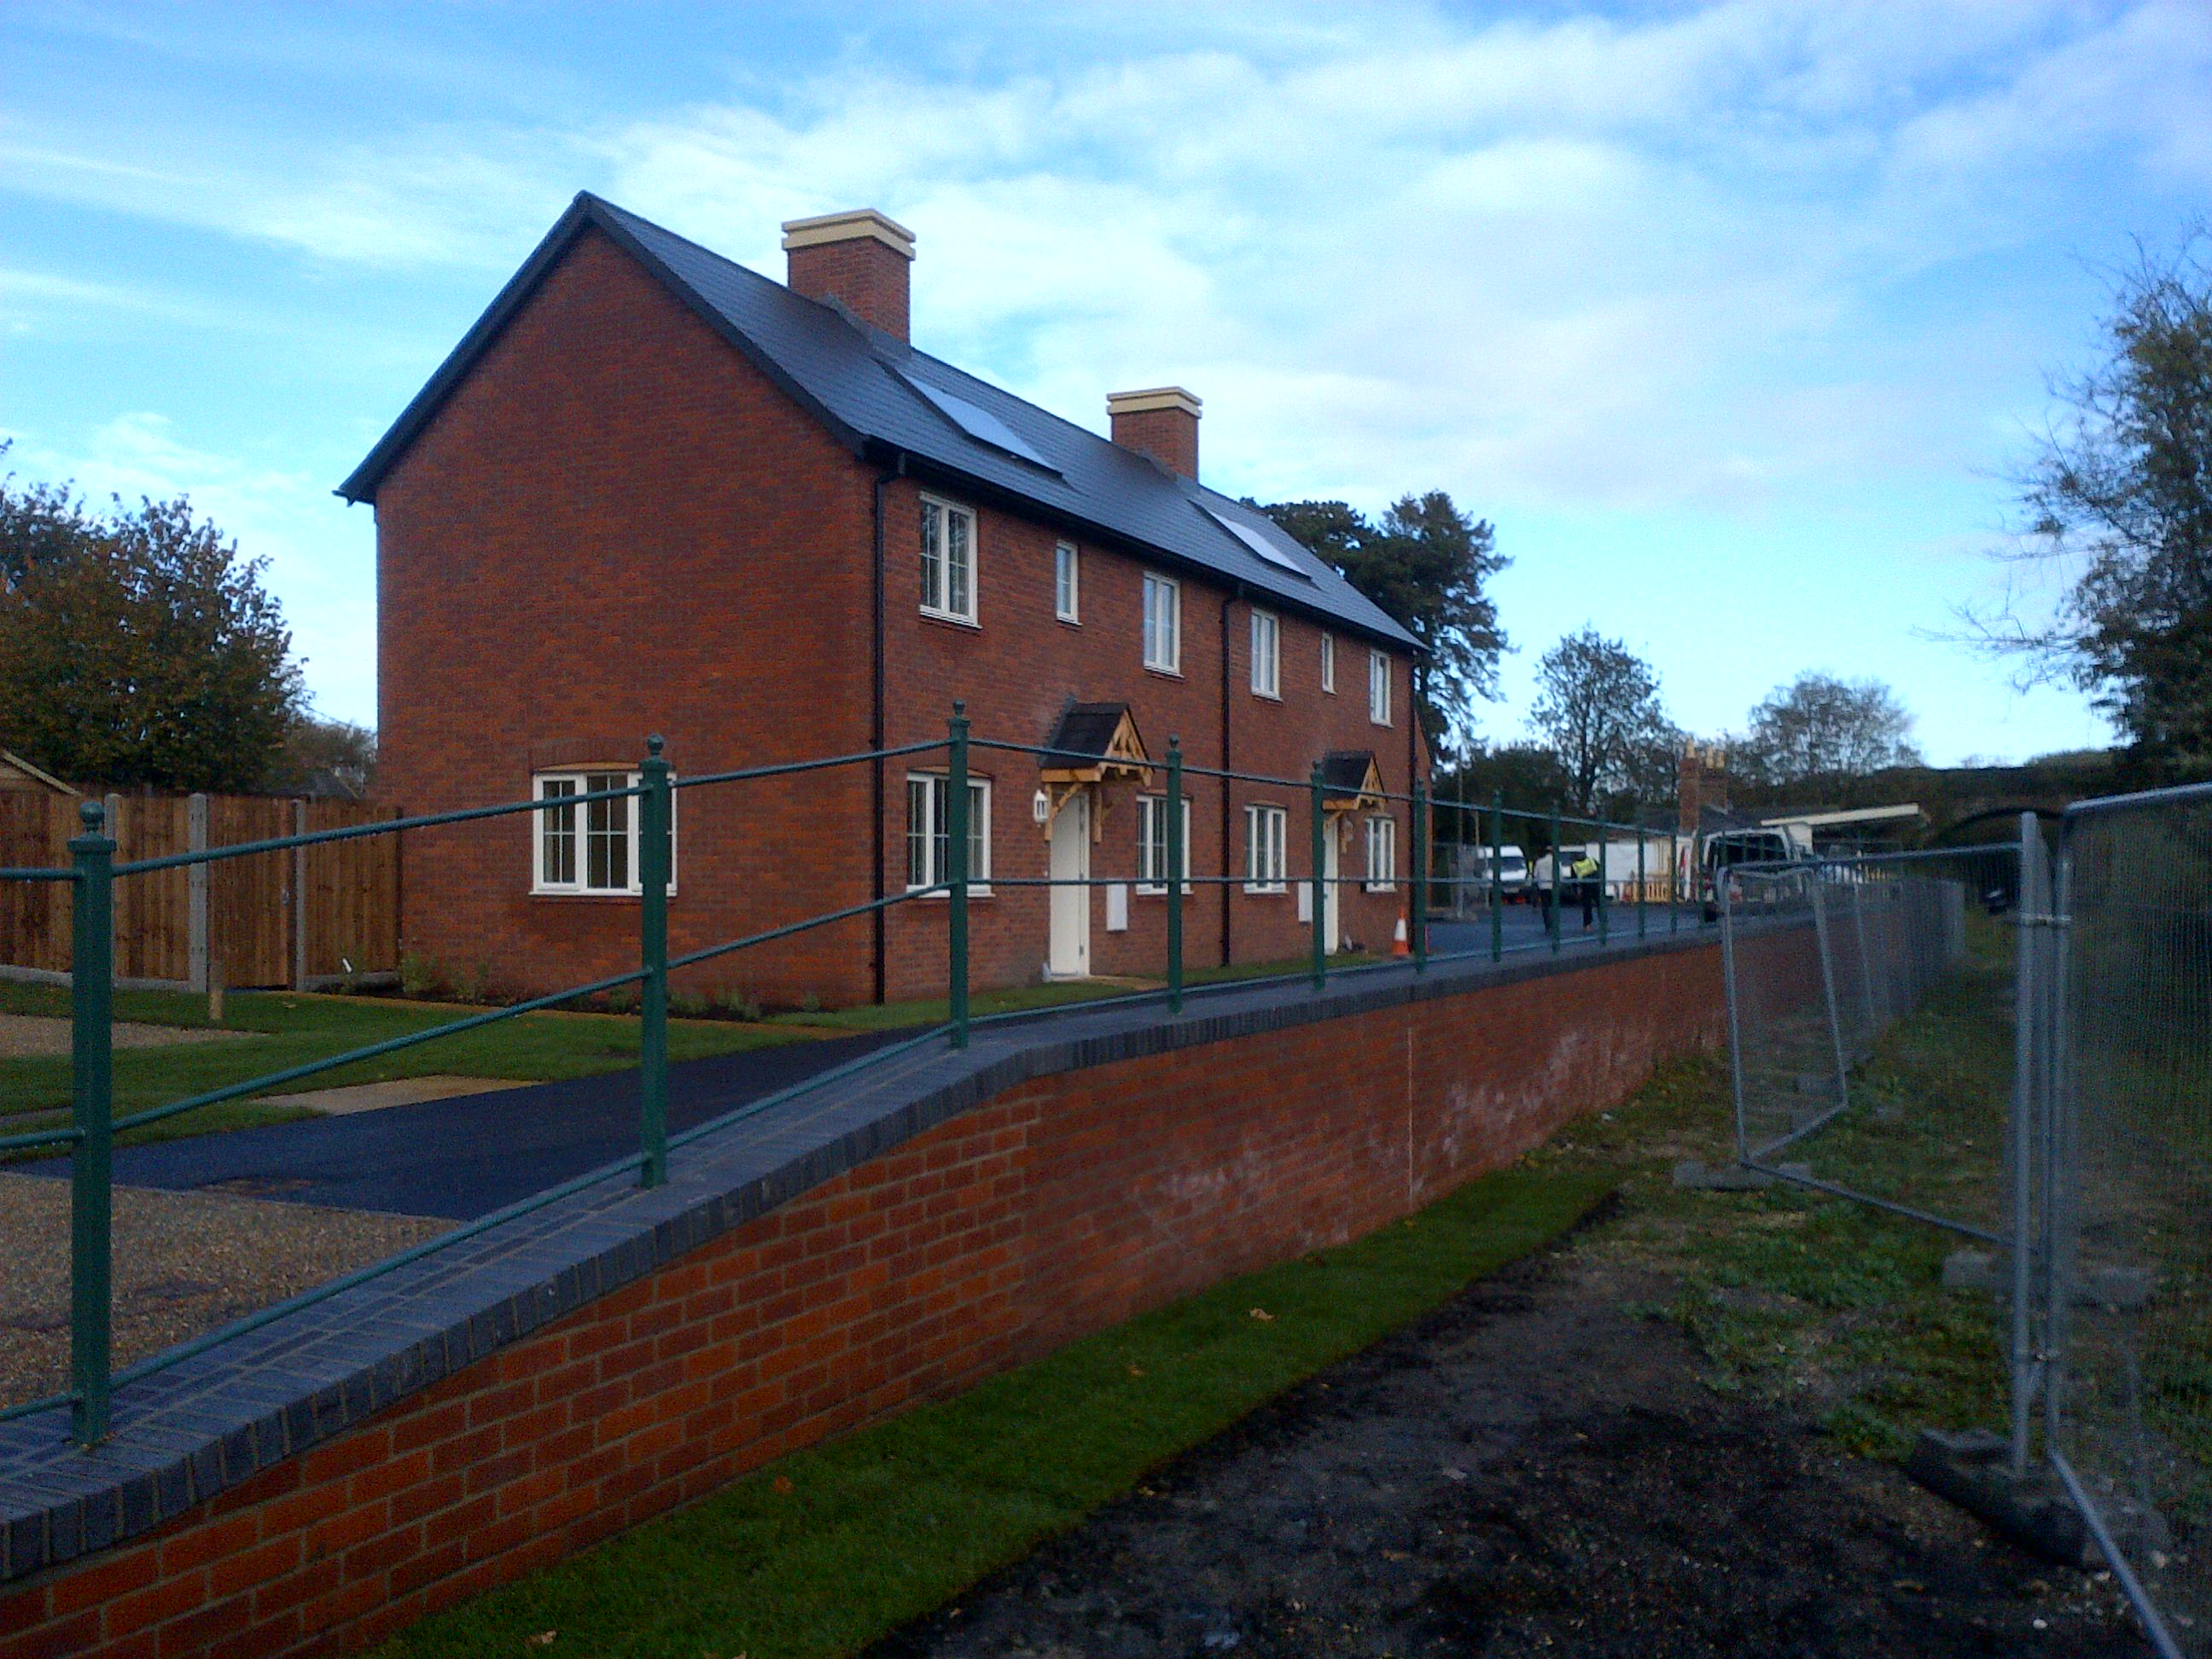 The completed timber frame properties with masonry fascade